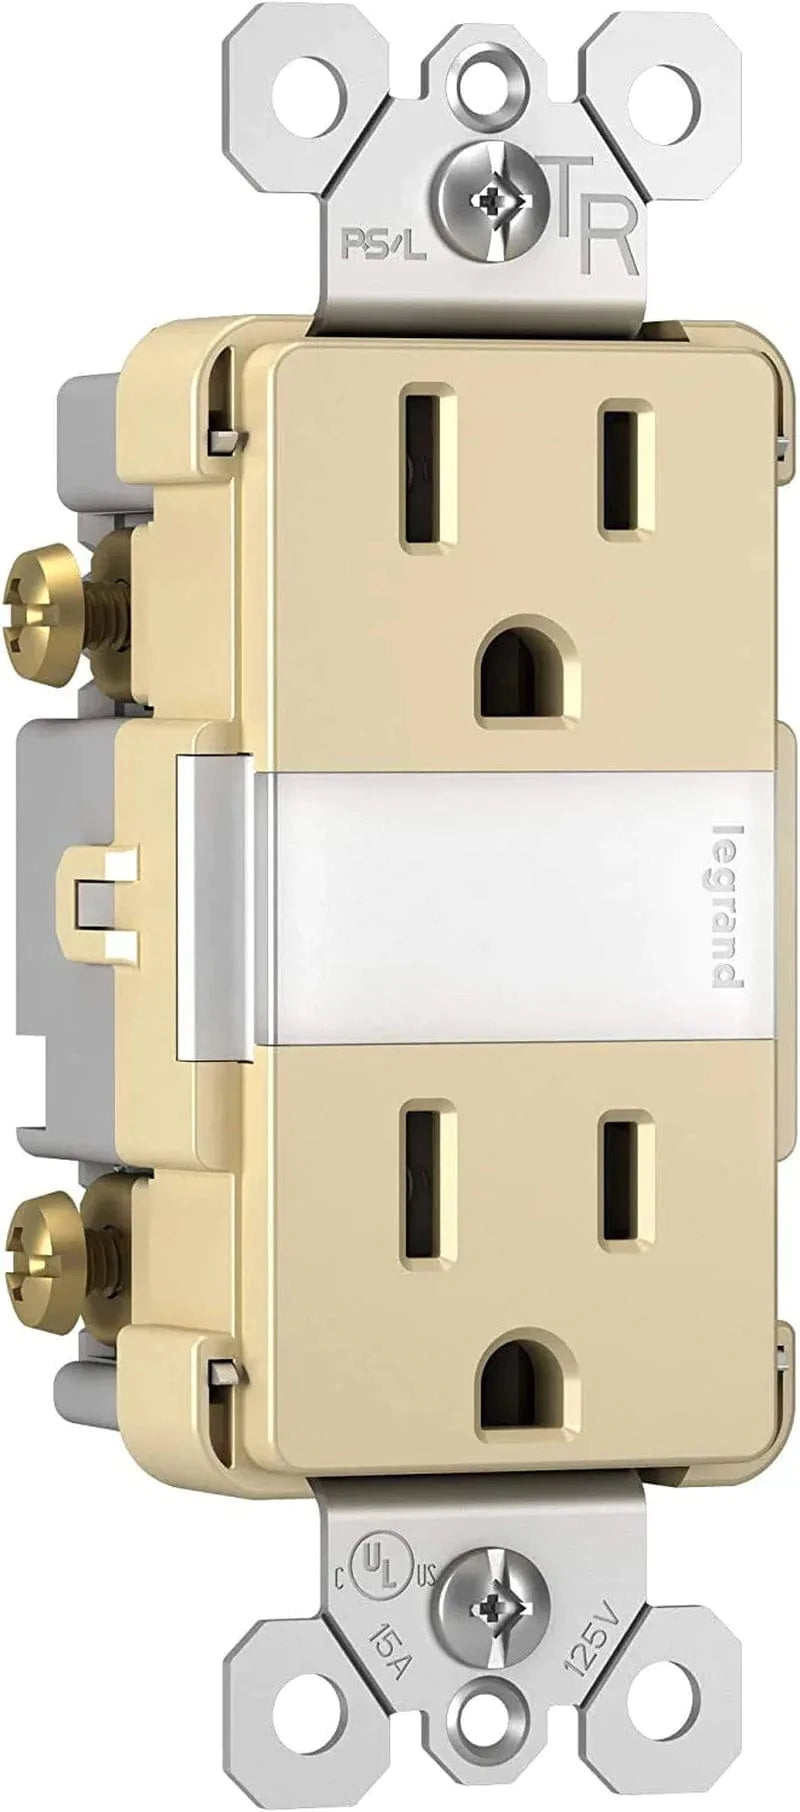 Legrand Radiant Adjustable LED Night Light Outlet, Nightlight Electrical Outlets for Bedroom and Hallway, Full, White, NTLFULLWCC6 Home & Garden > Lighting > Night Lights & Ambient Lighting Legrand-Pass & Seymour Ivory Night Light Outlet Resistant